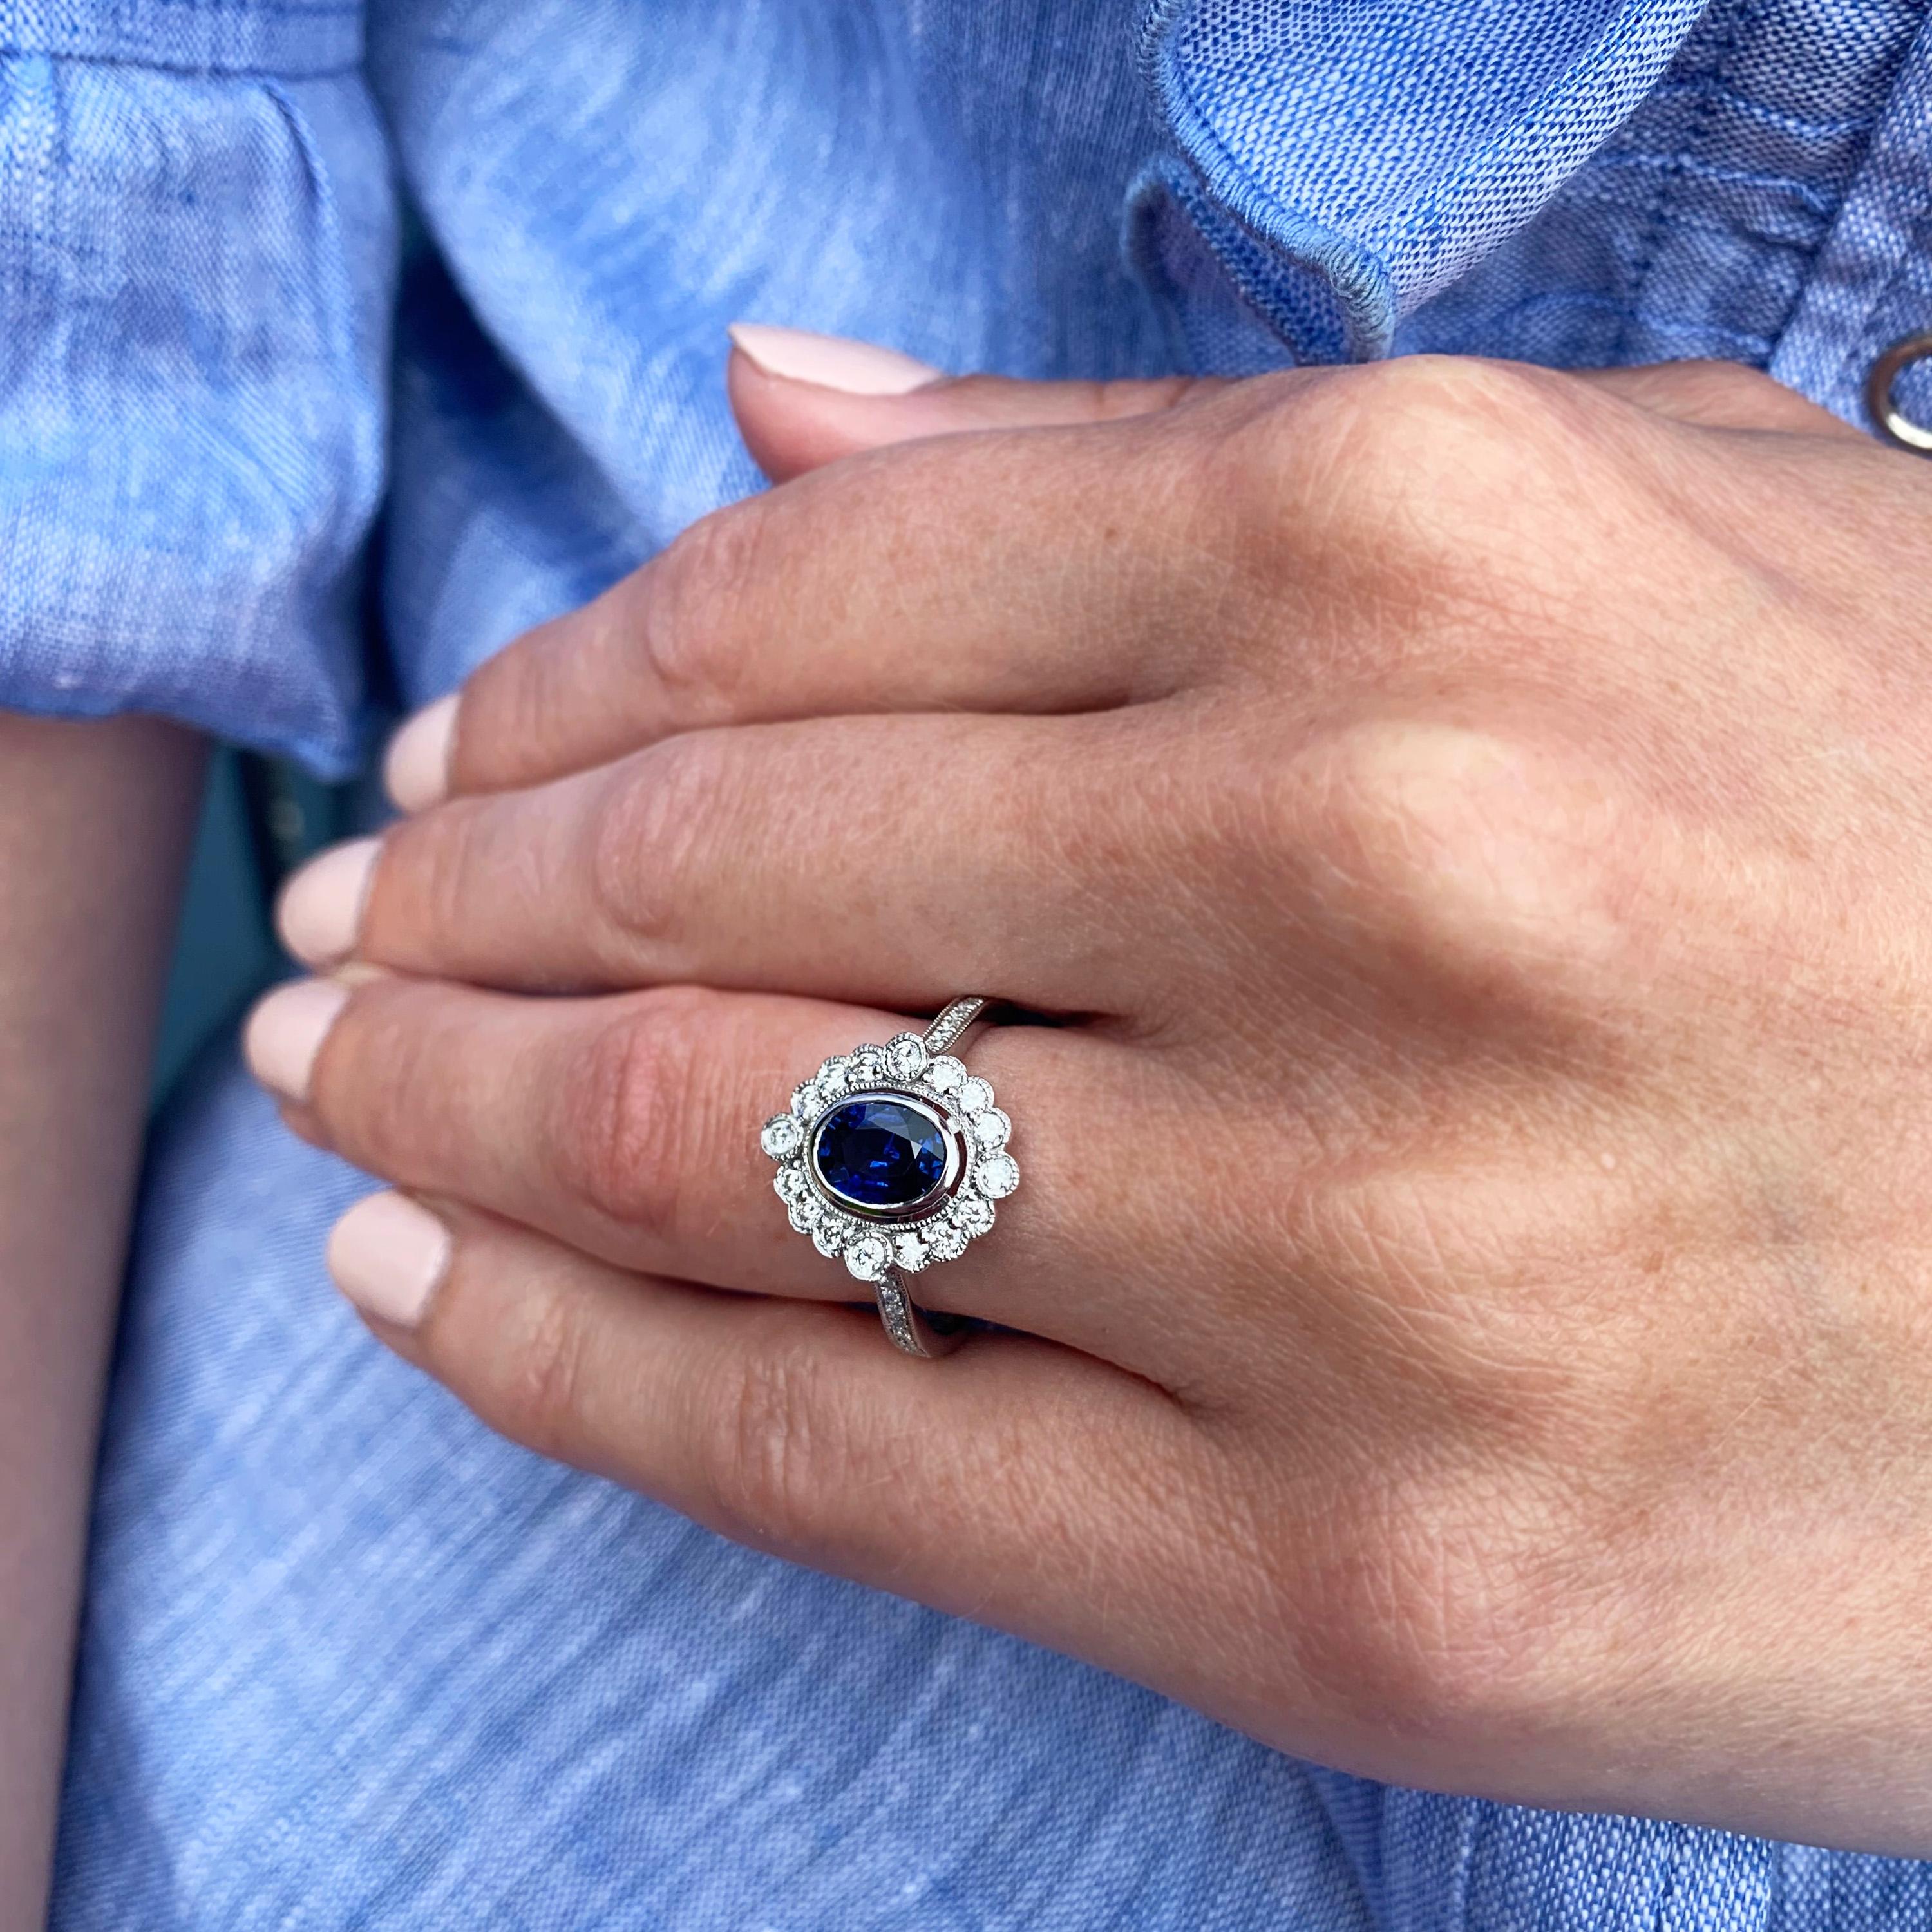 Sapphire and Diamond Vintage Inspired Engagement Ring In New Condition For Sale In Dublin 2, Dublin 2